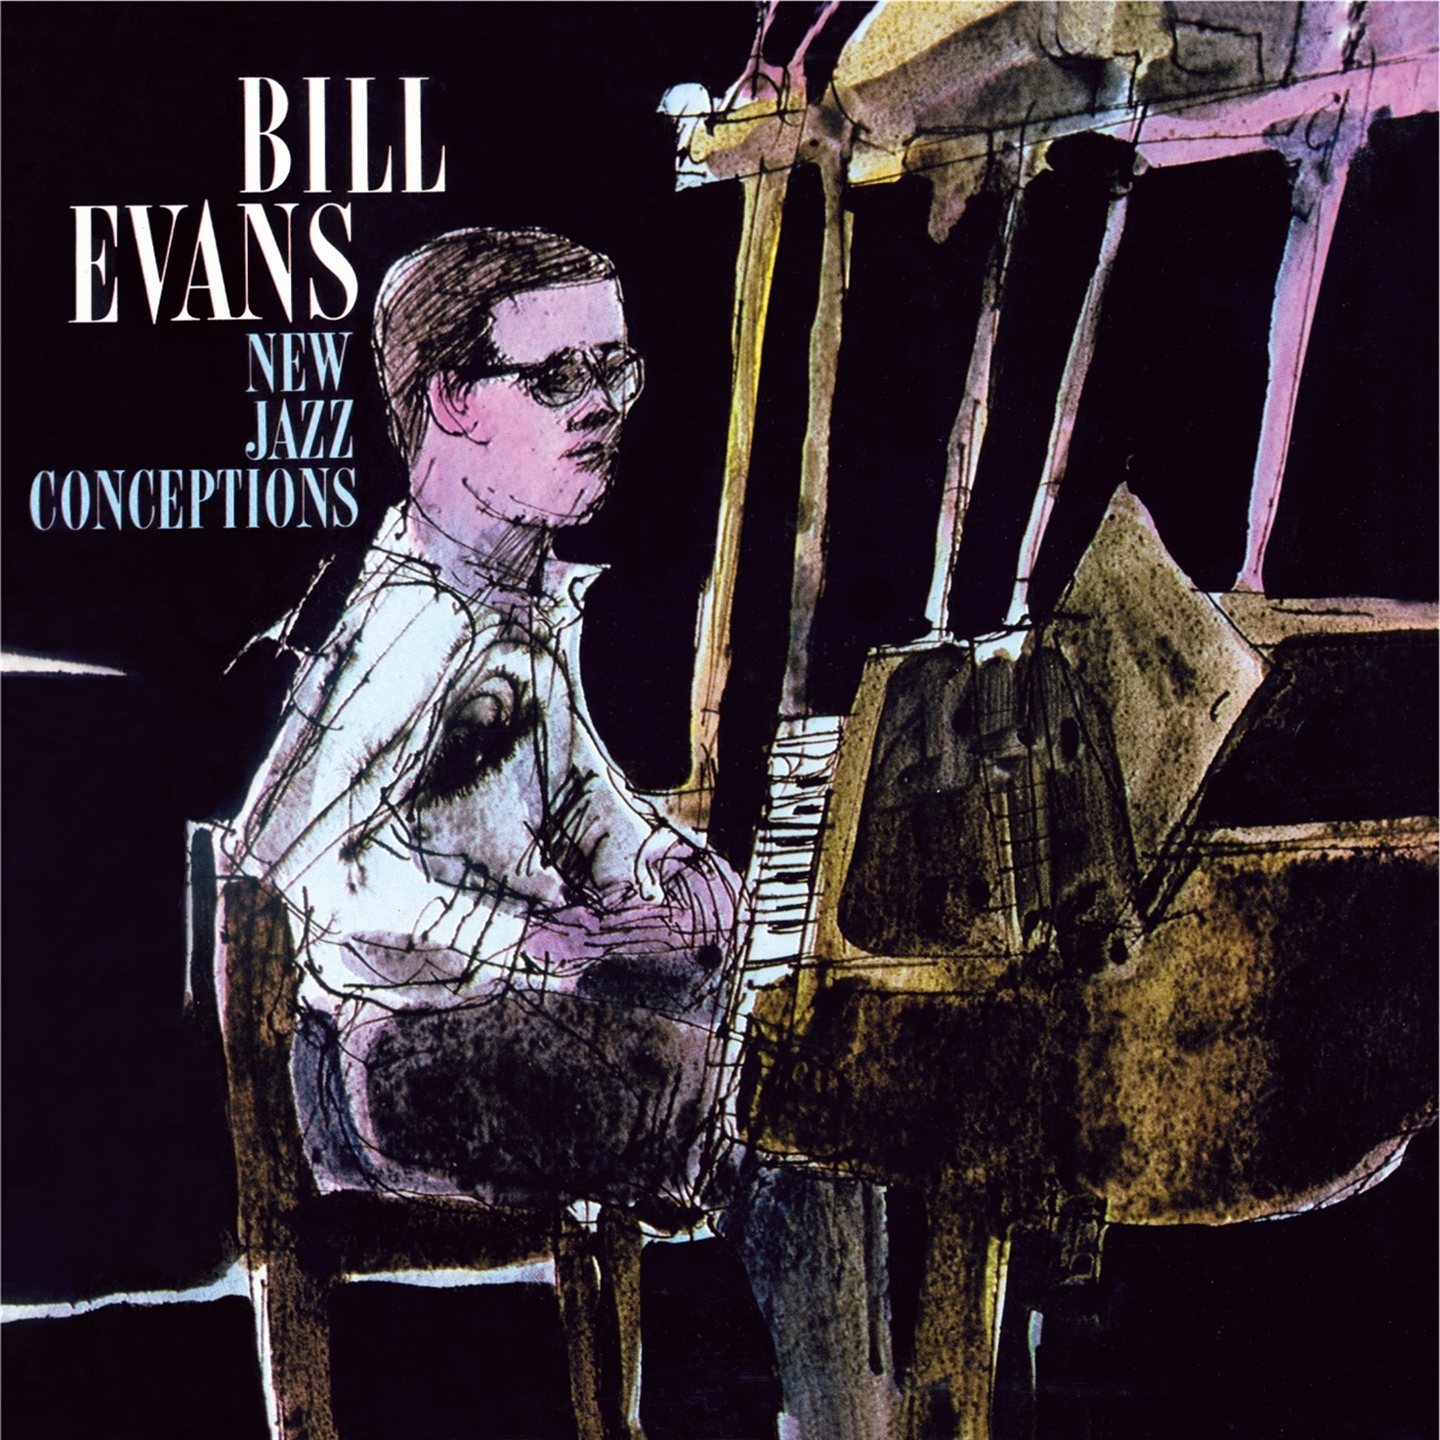 NEW JAZZ CONCEPTIONS